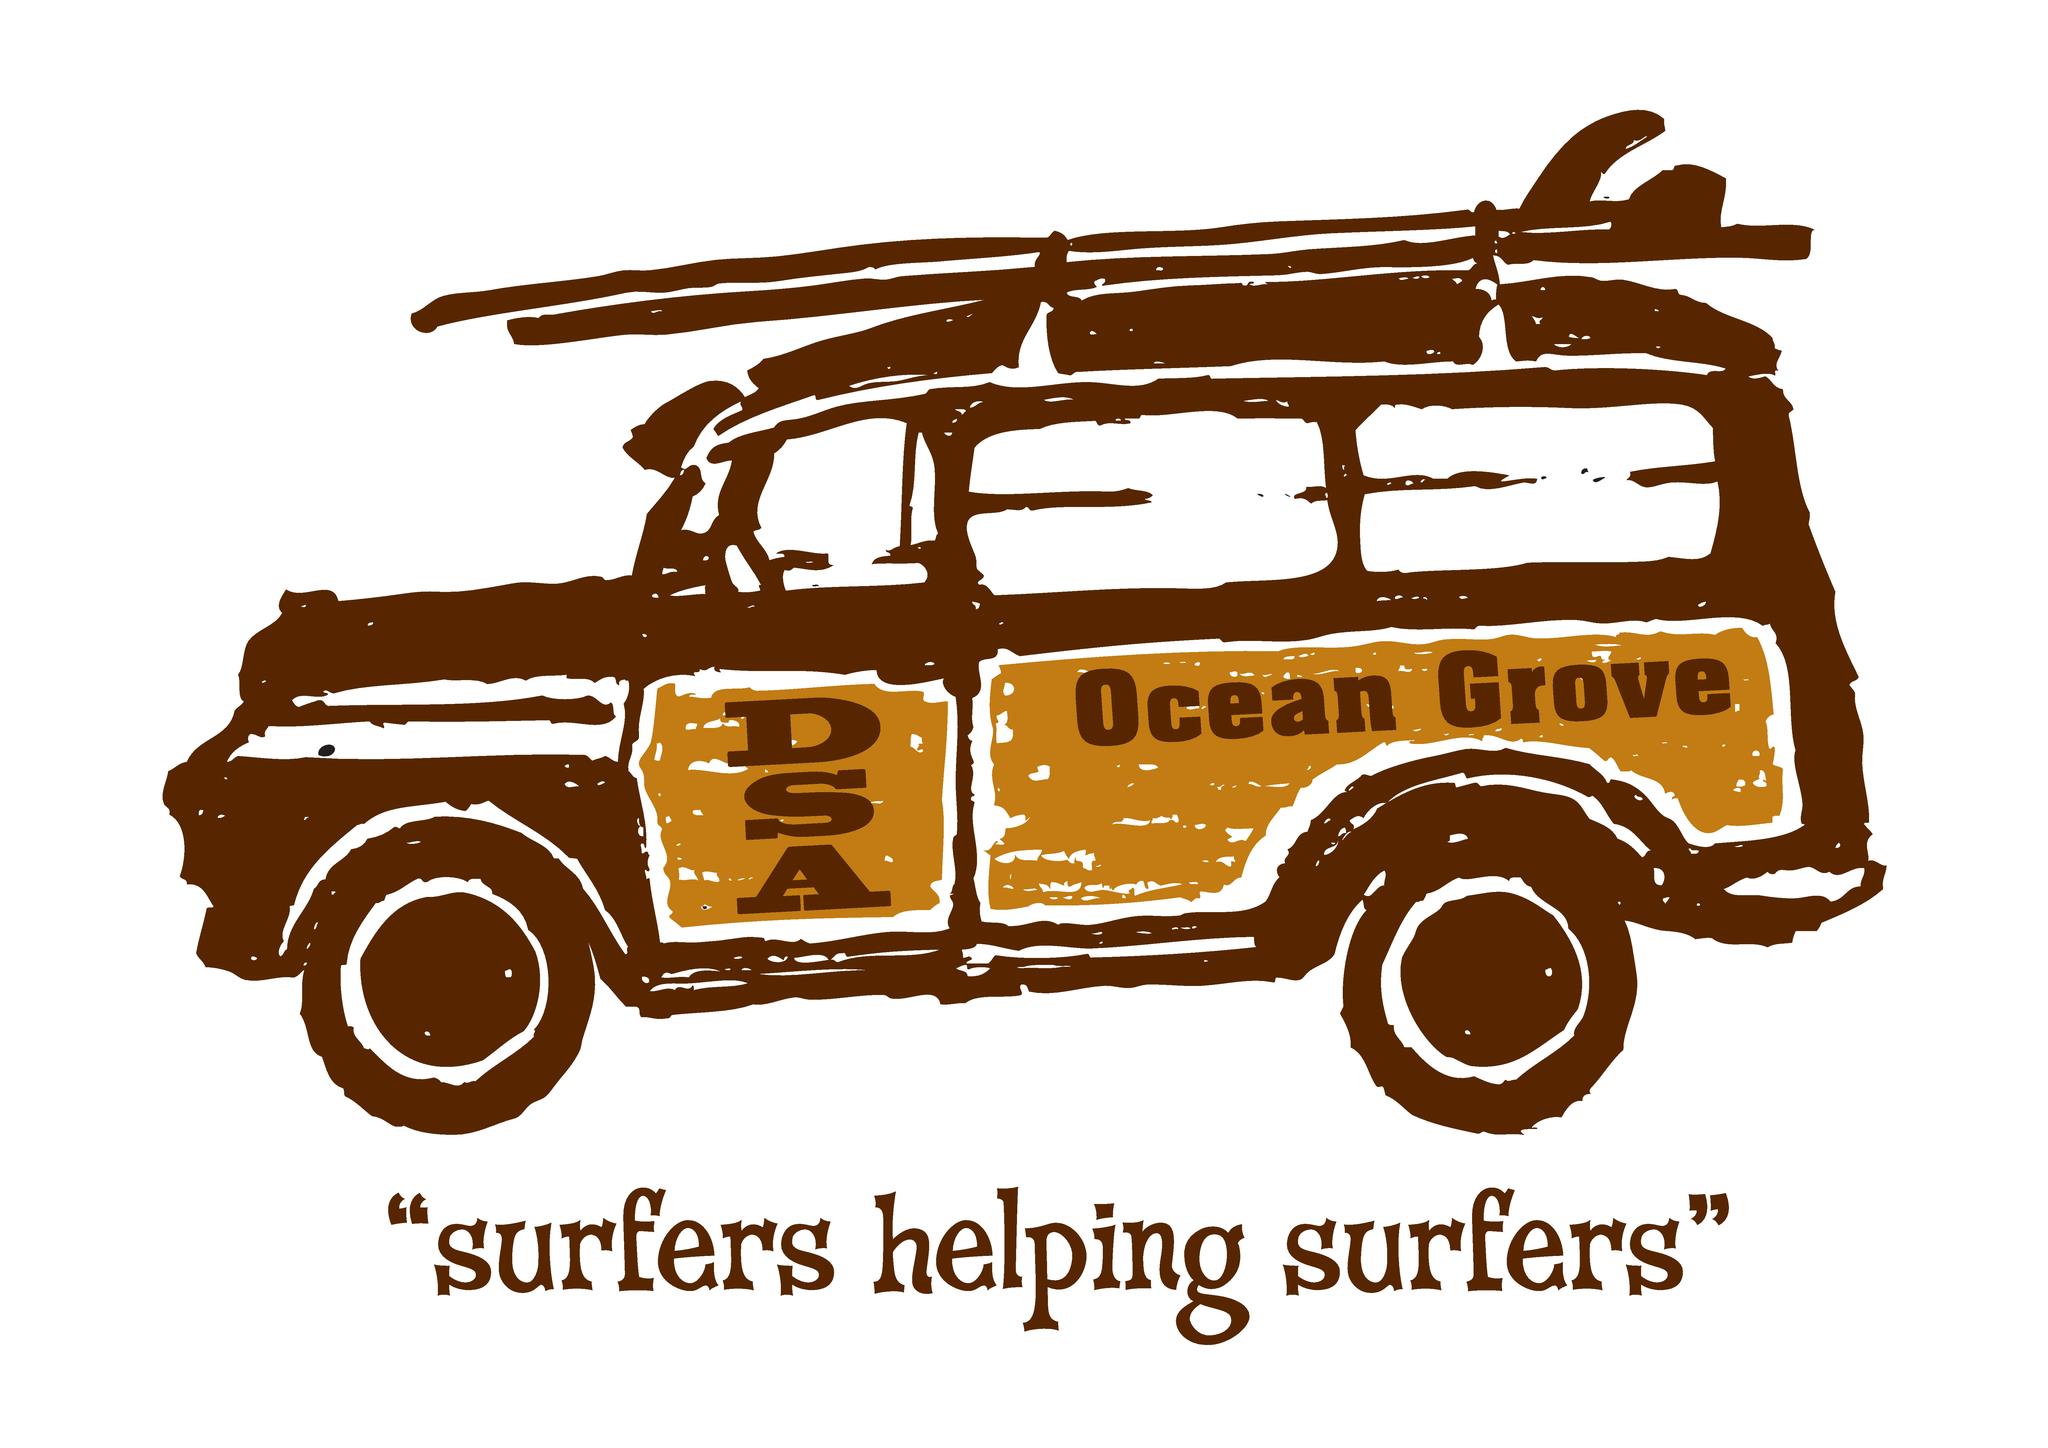 Disabled Surfers Ocean Grove this Sunday 21st Feb